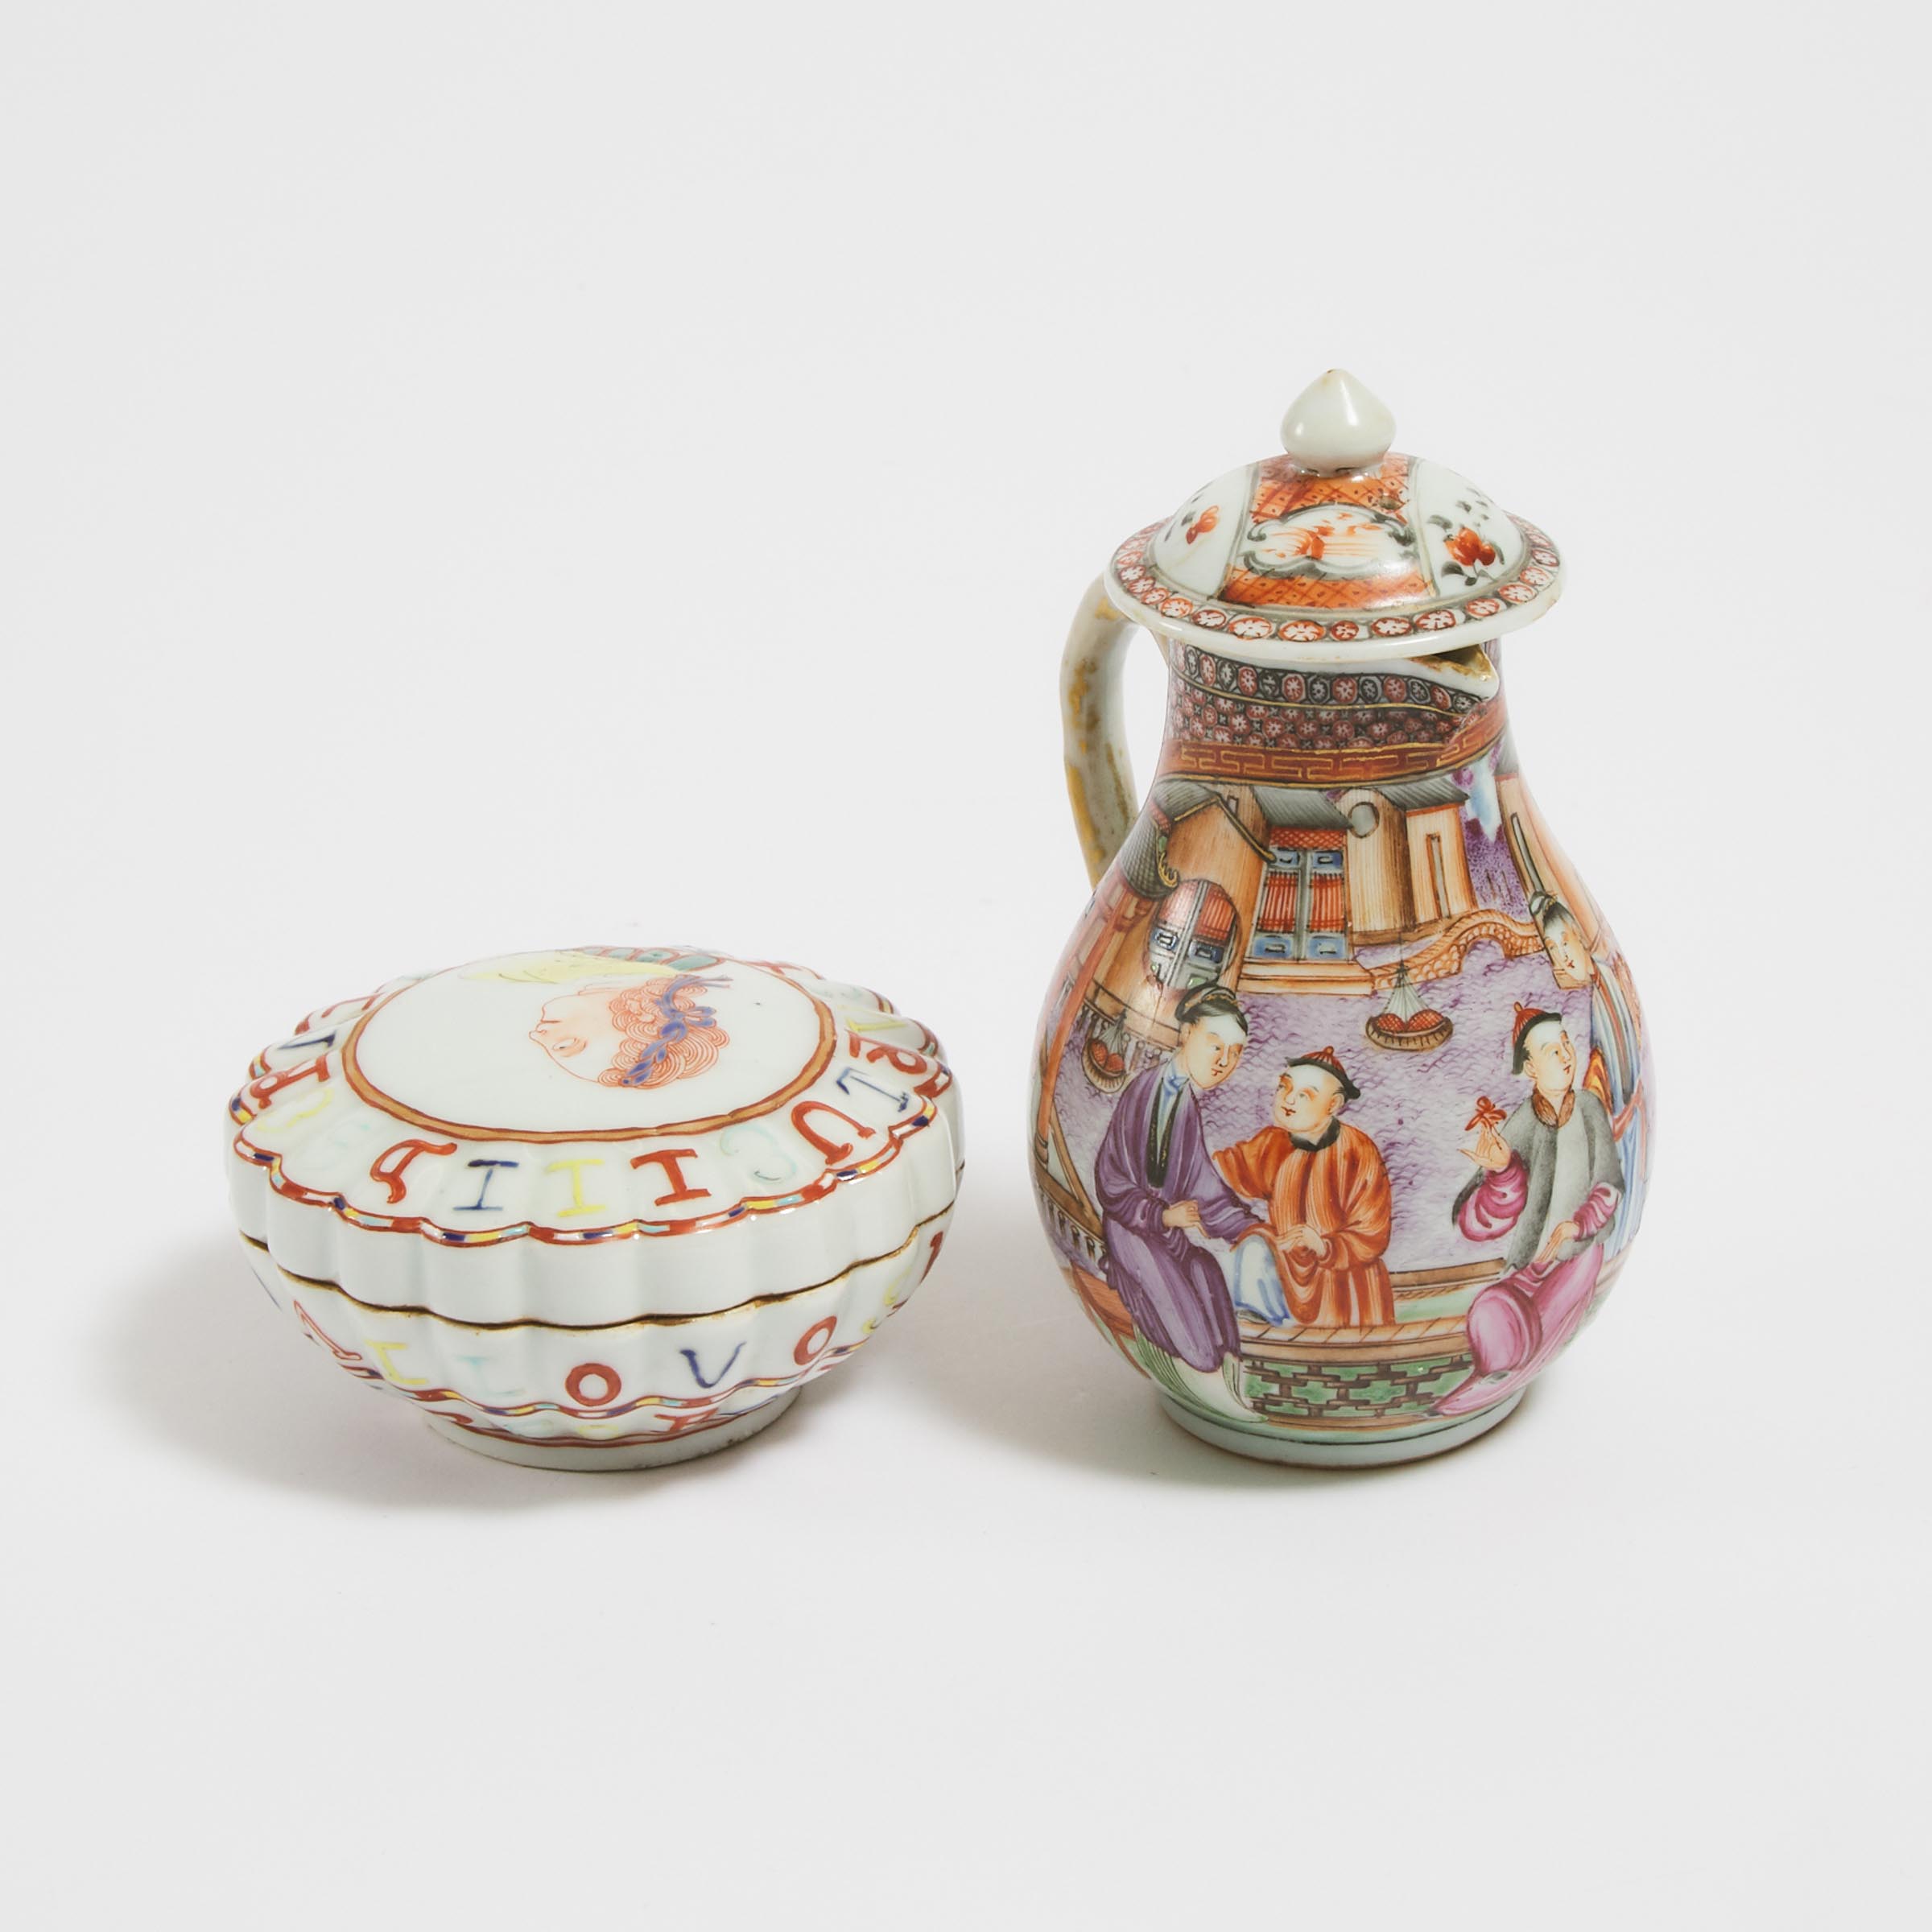 A Chinese Export 'European Subject' Box and Cover, Together With a Famille Rose 'Figural' Teapot, 18th Century